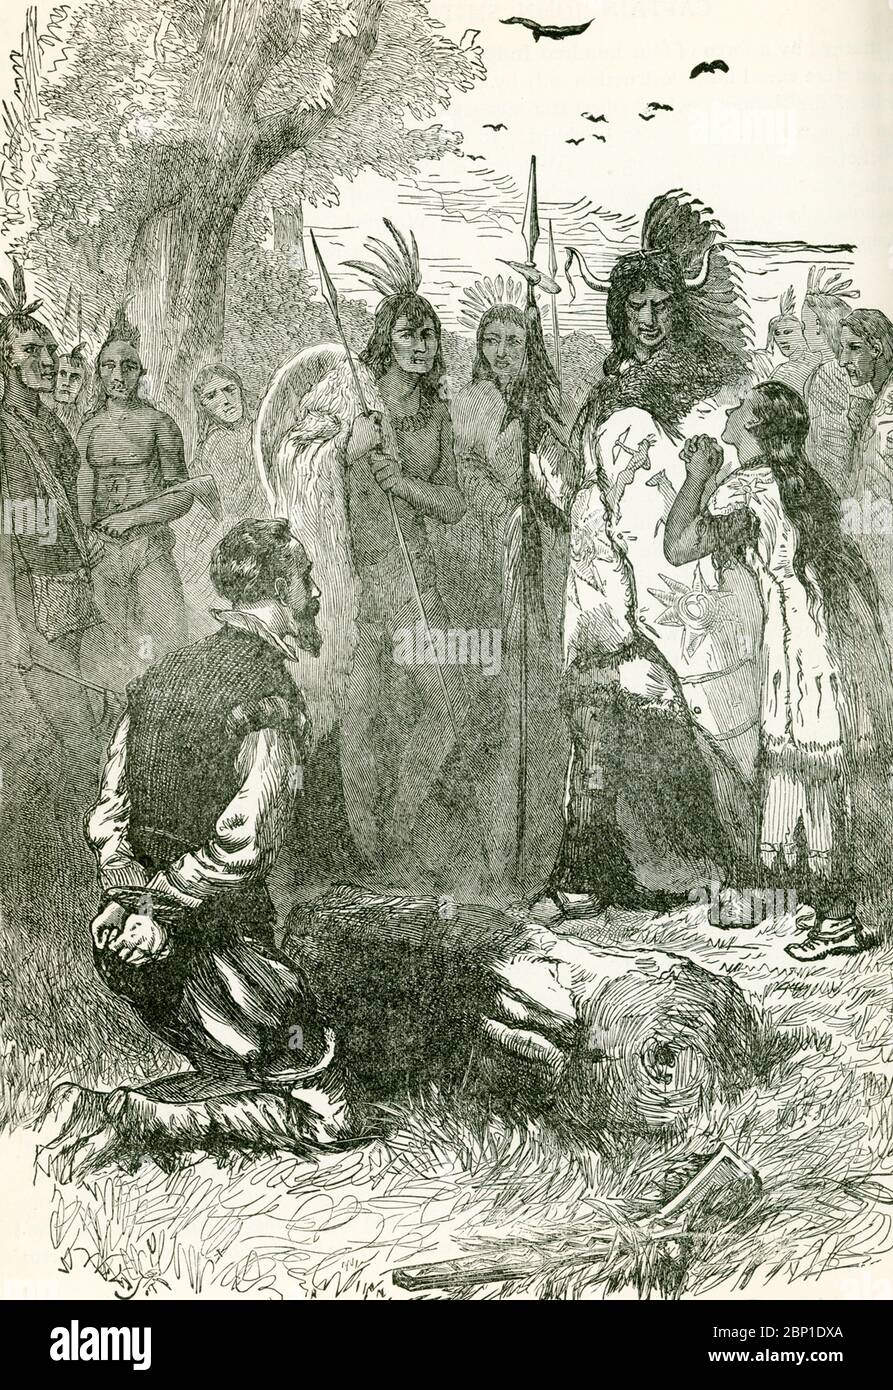 This 1890s illustration shows Pocahontas interceding for the life of Captain John Smith. Tradition (not authenticated) says that Pocahontas saved John Smith from death at the hands of Native Americans. Stock Photo